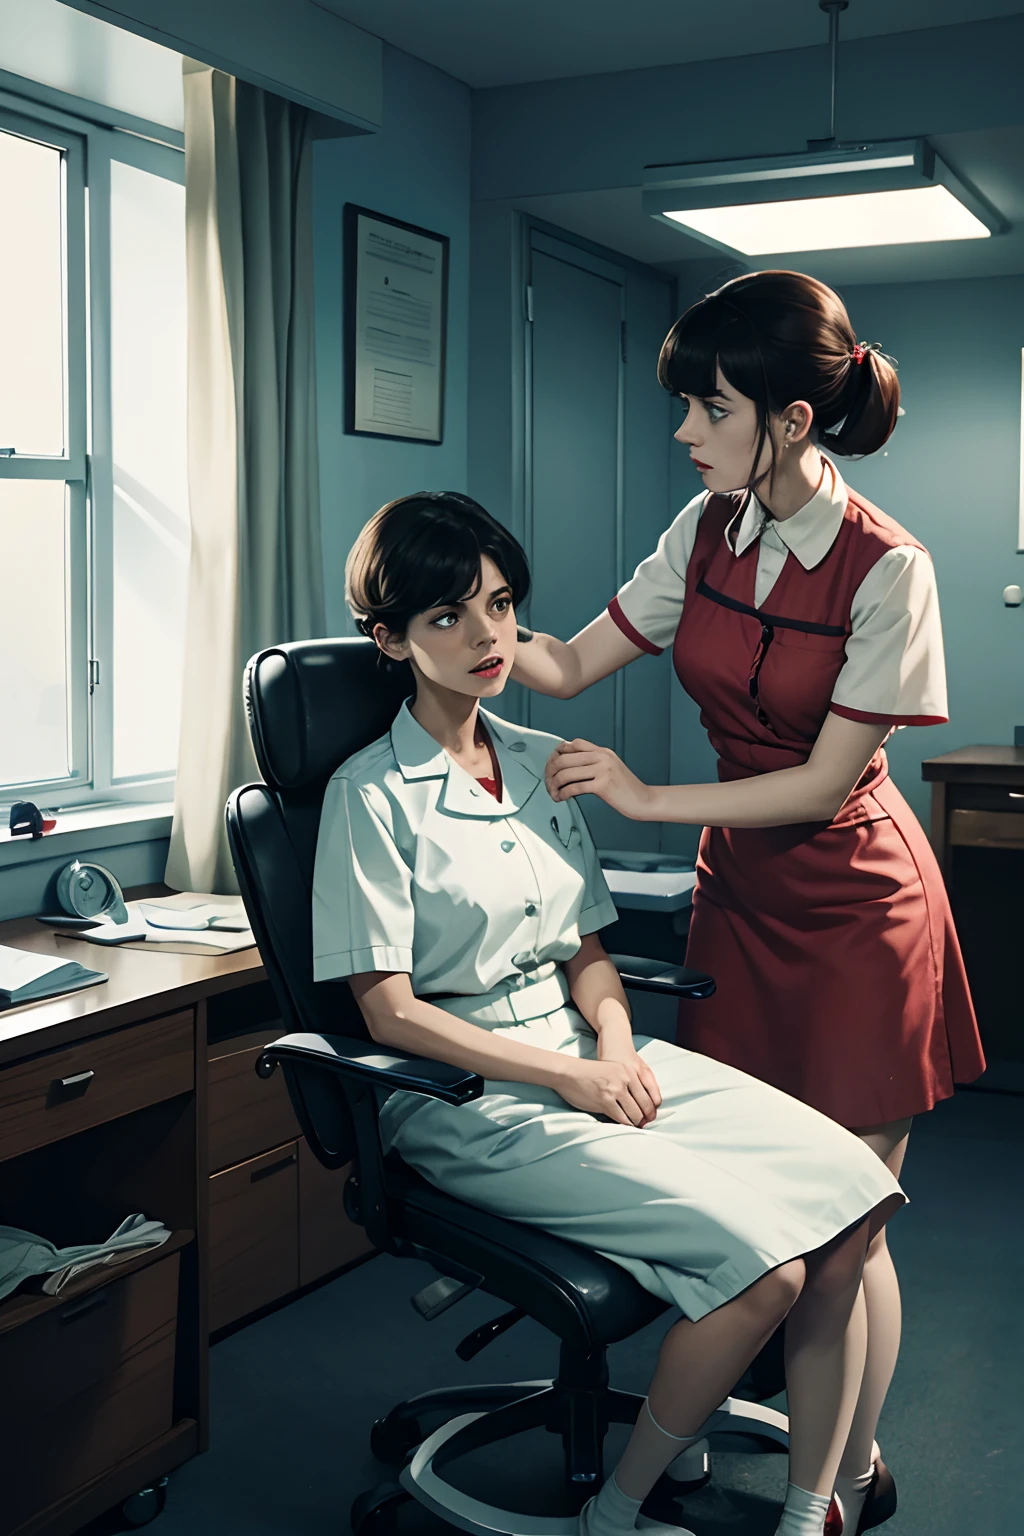 Illustration from a British horror film of the 1960s: Two nurses prepare a mentally ill and dangerous patient for examination. The patient is tied to the examination chair.